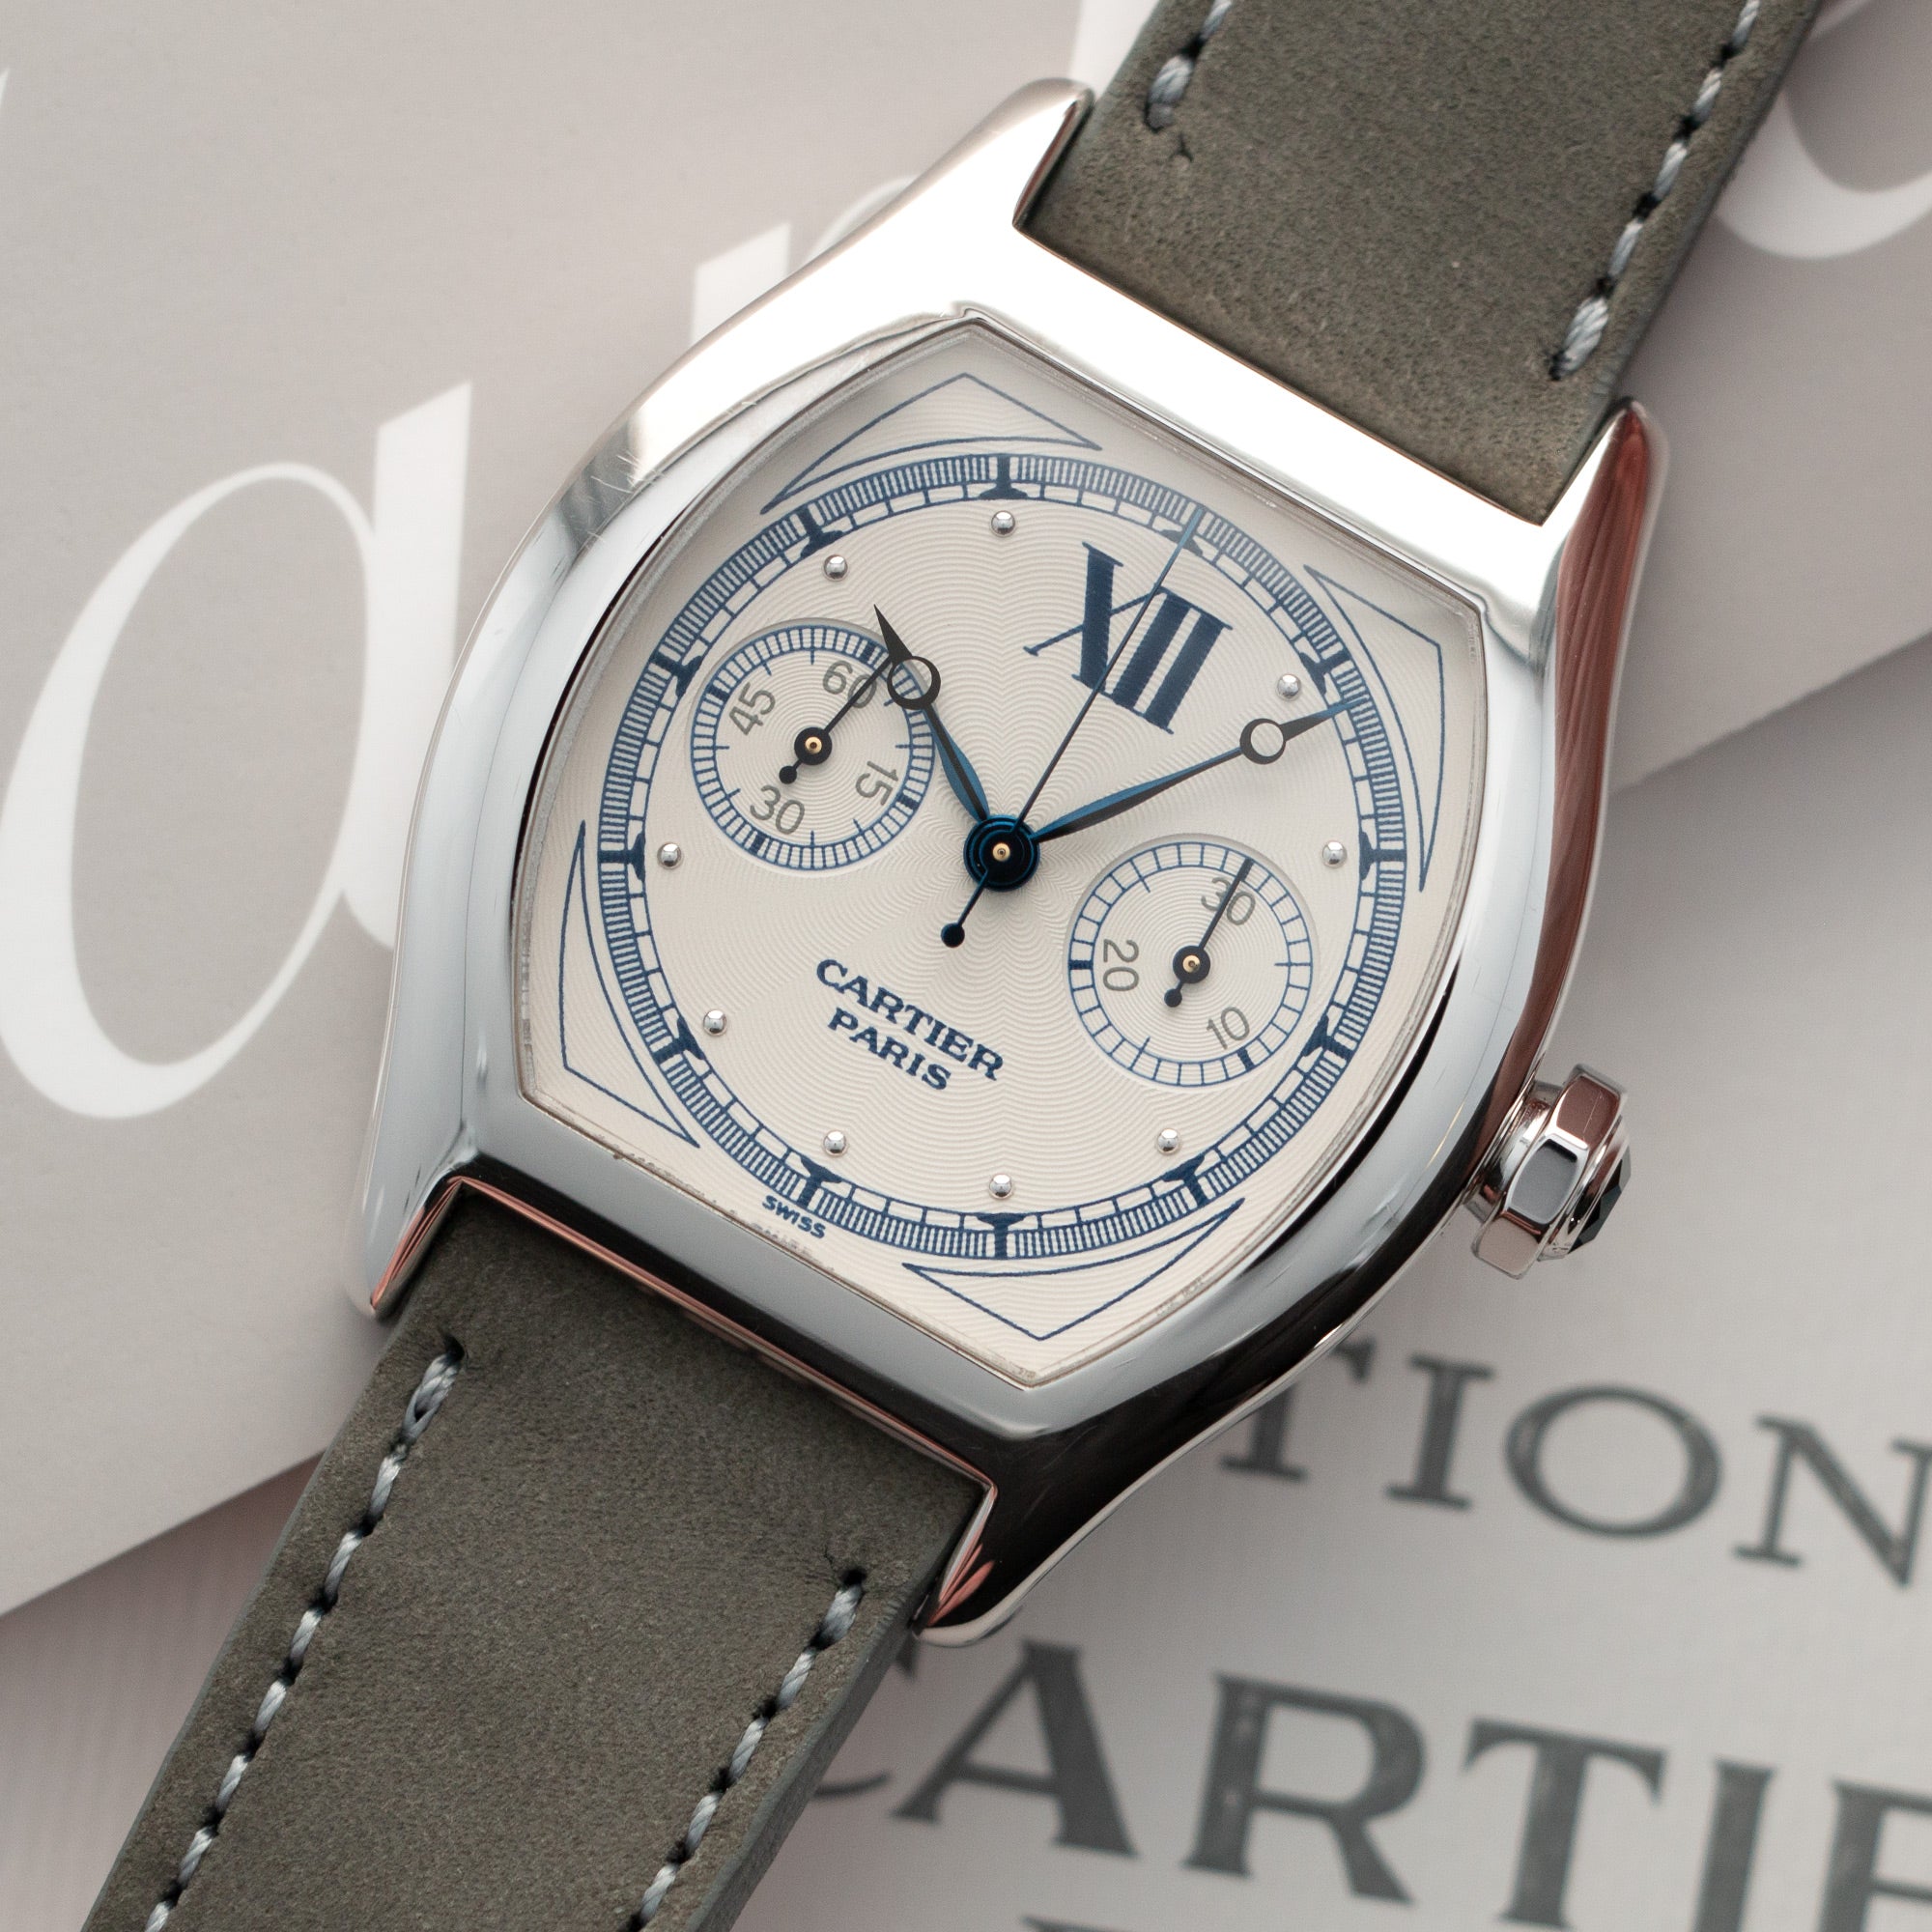 Cartier - Cartier White Gold Tortue Monopoussir Watch, Ref 2396 - The Keystone Watches